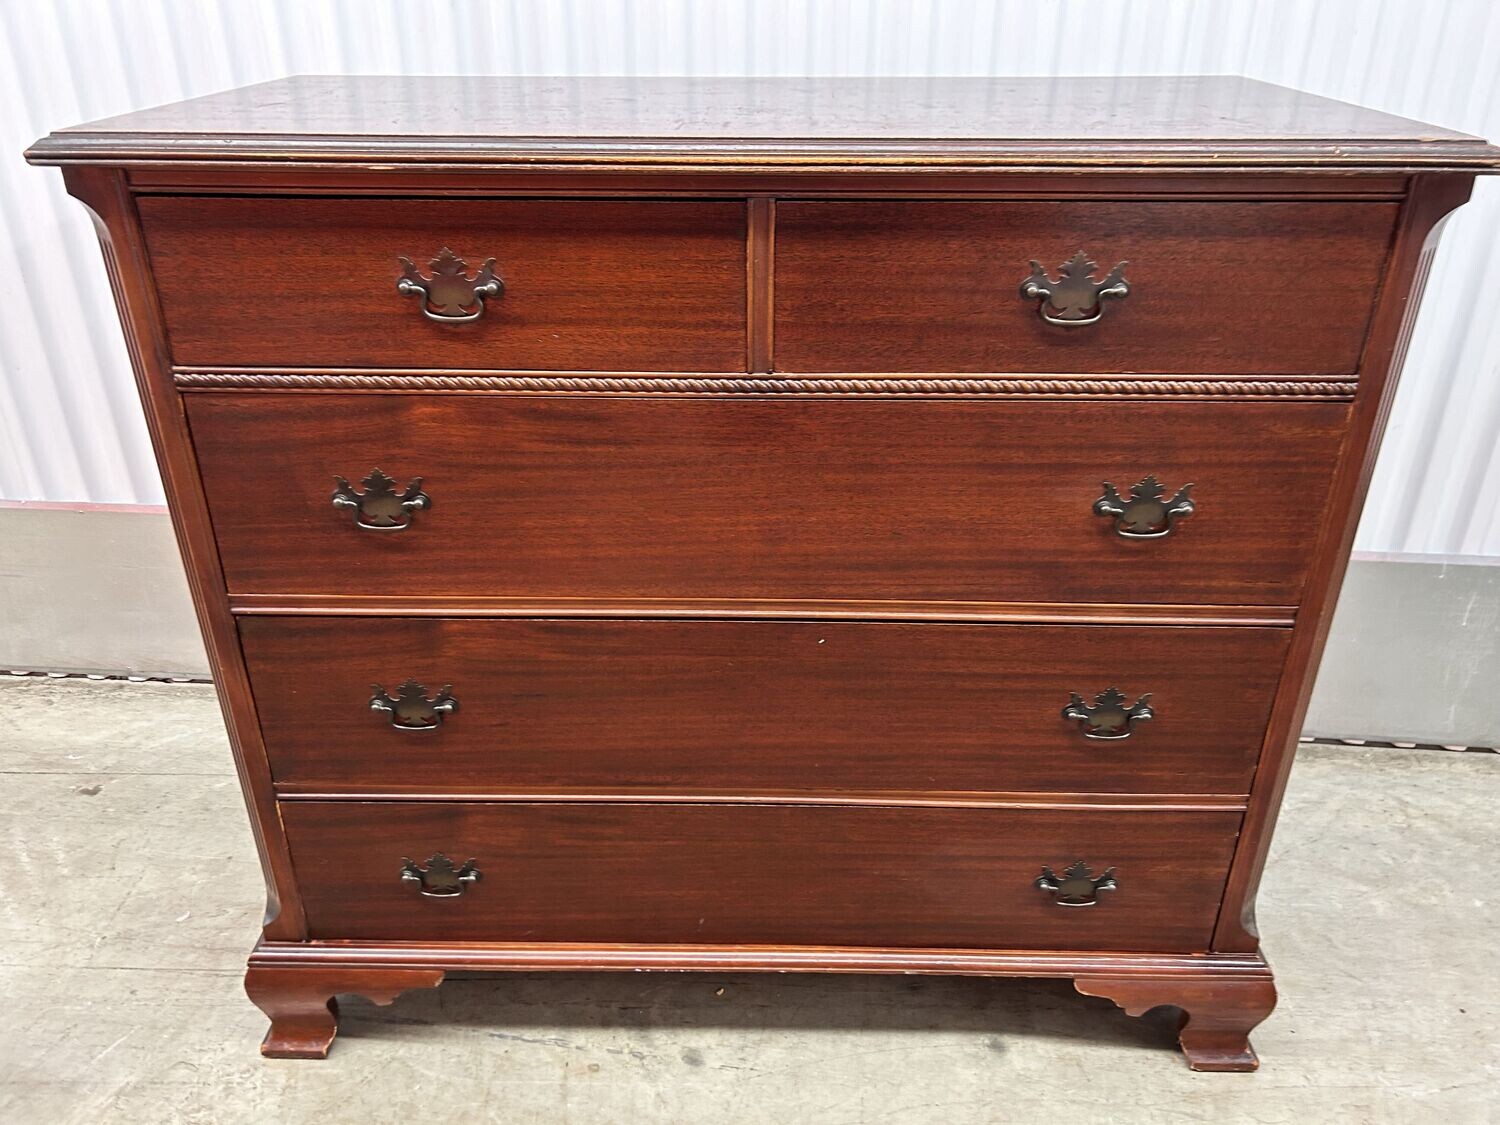 Vintage 5-drawer Dresser, mahogany finish #2214 ** 1 mo. to sell, full price